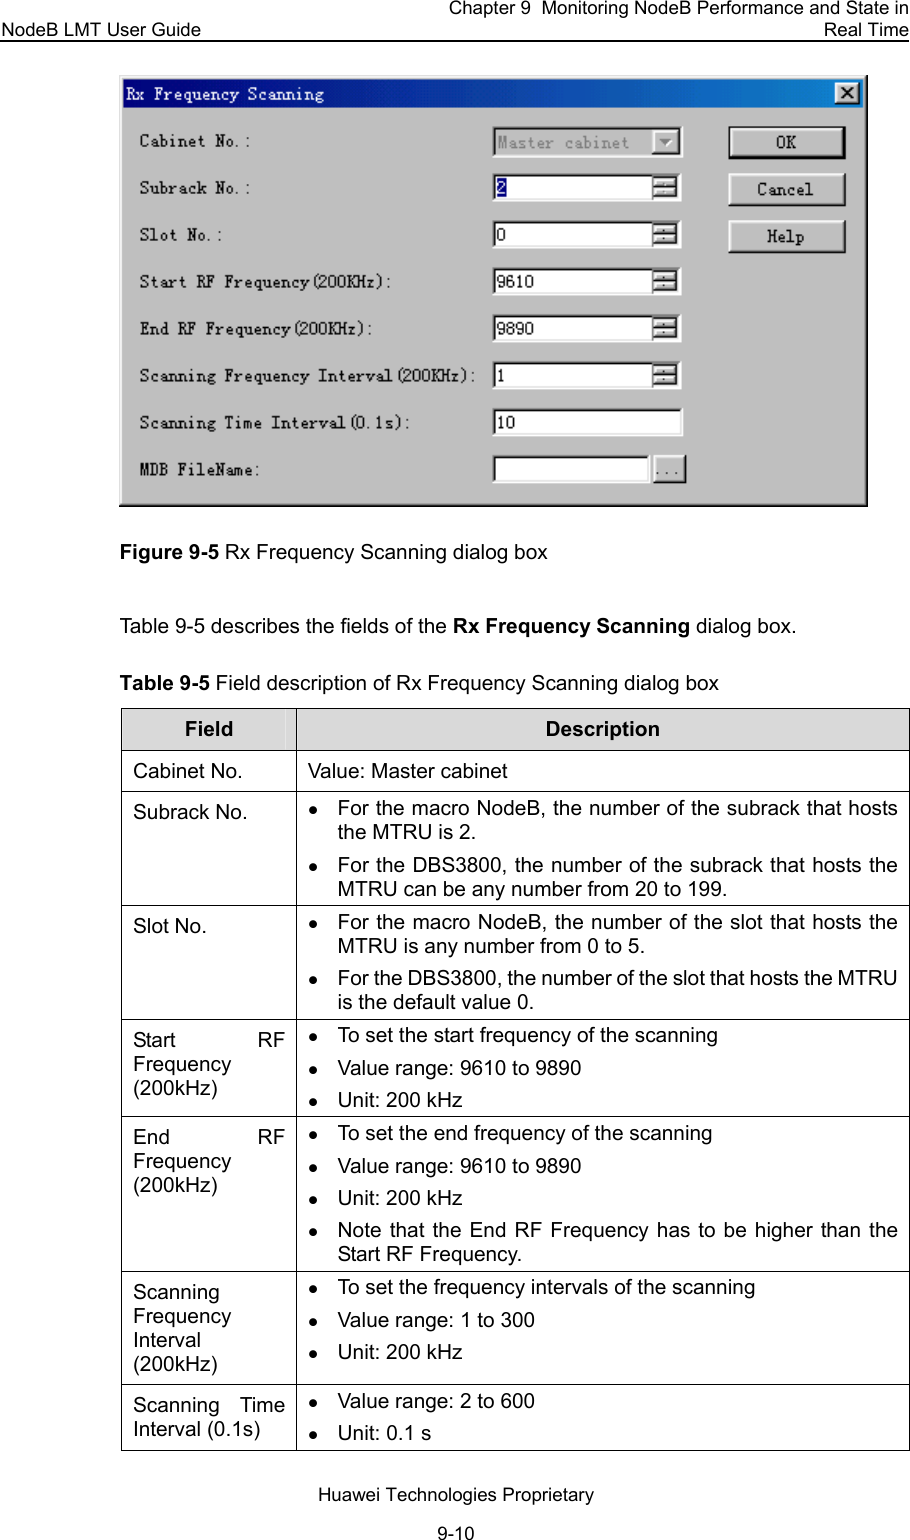 NodeB LMT User Guide Chapter 9  Monitoring NodeB Performance and State in Real Time Huawei Technologies Proprietary 9-10  Figure 9-5 Rx Frequency Scanning dialog box  Table 9-5 describes the fields of the Rx Frequency Scanning dialog box.  Table 9-5 Field description of Rx Frequency Scanning dialog box  Field   Description  Cabinet No.  Value: Master cabinet  Subrack No. z For the macro NodeB, the number of the subrack that hosts the MTRU is 2. z For the DBS3800, the number of the subrack that hosts the MTRU can be any number from 20 to 199. Slot No.  z For the macro NodeB, the number of the slot that hosts the MTRU is any number from 0 to 5.  z For the DBS3800, the number of the slot that hosts the MTRU is the default value 0.  Start RF Frequency (200kHz)  z To set the start frequency of the scanning z Value range: 9610 to 9890 z Unit: 200 kHz End RF Frequency (200kHz) z To set the end frequency of the scanning z Value range: 9610 to 9890 z Unit: 200 kHz z Note that the End RF Frequency has to be higher than the Start RF Frequency. Scanning Frequency Interval (200kHz) z To set the frequency intervals of the scanning z Value range: 1 to 300 z Unit: 200 kHz Scanning Time Interval (0.1s) z Value range: 2 to 600 z Unit: 0.1 s 